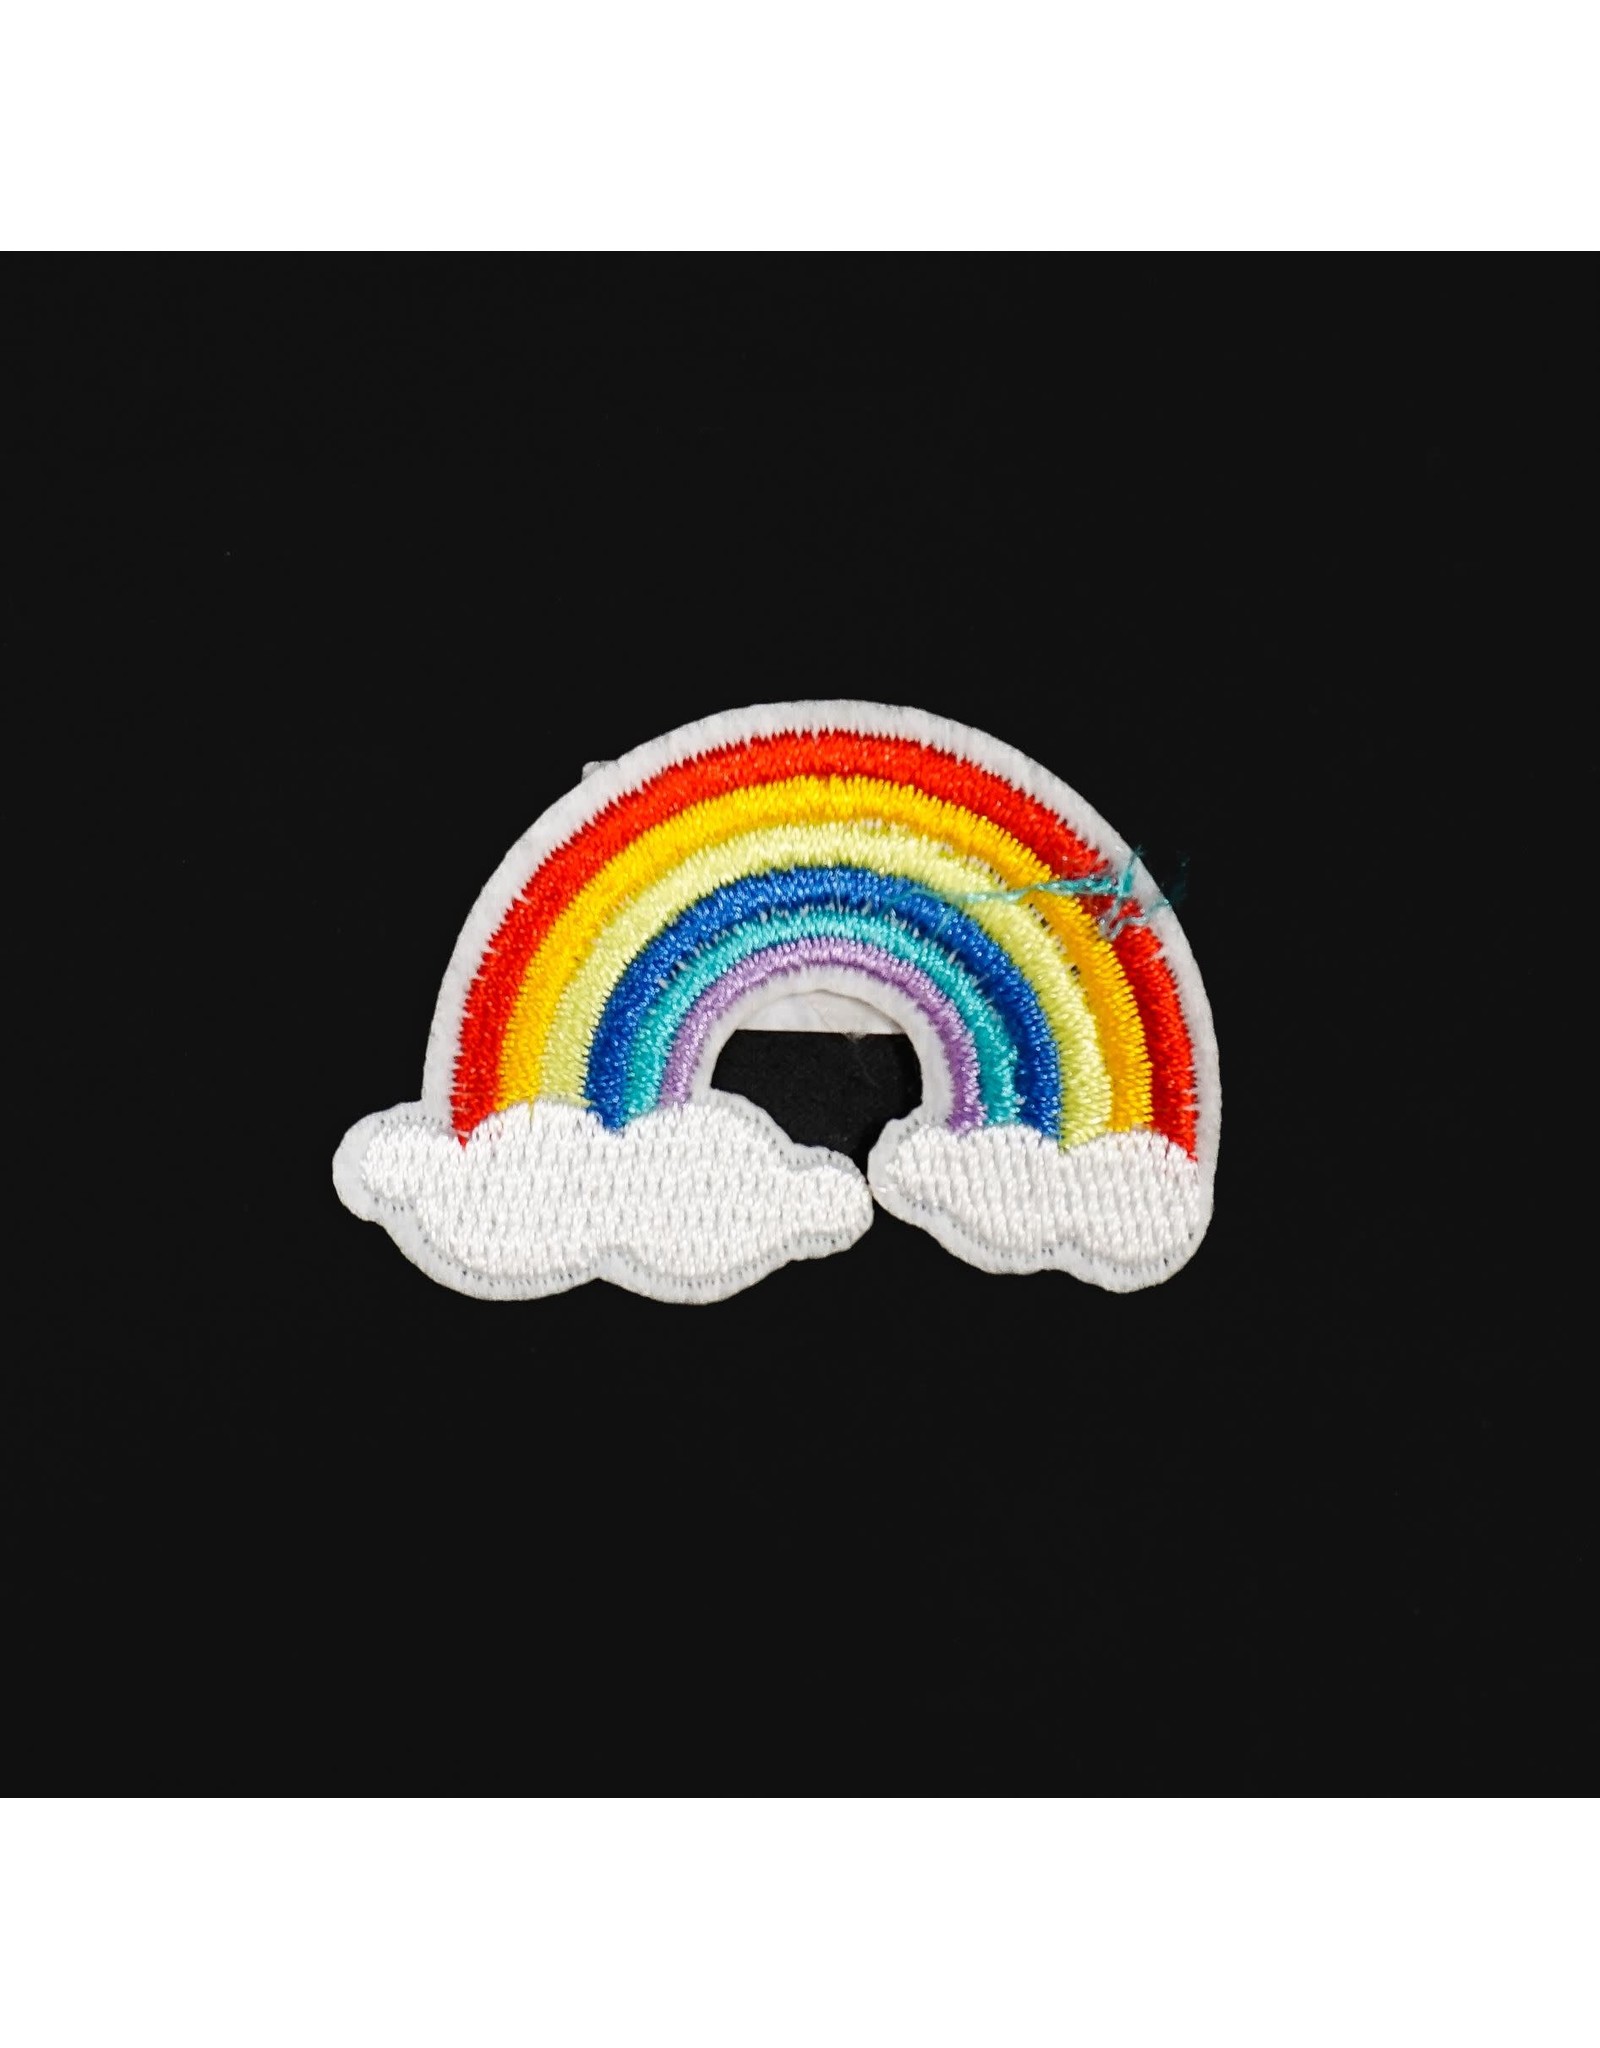 Patch - Small Rainbow Cloud